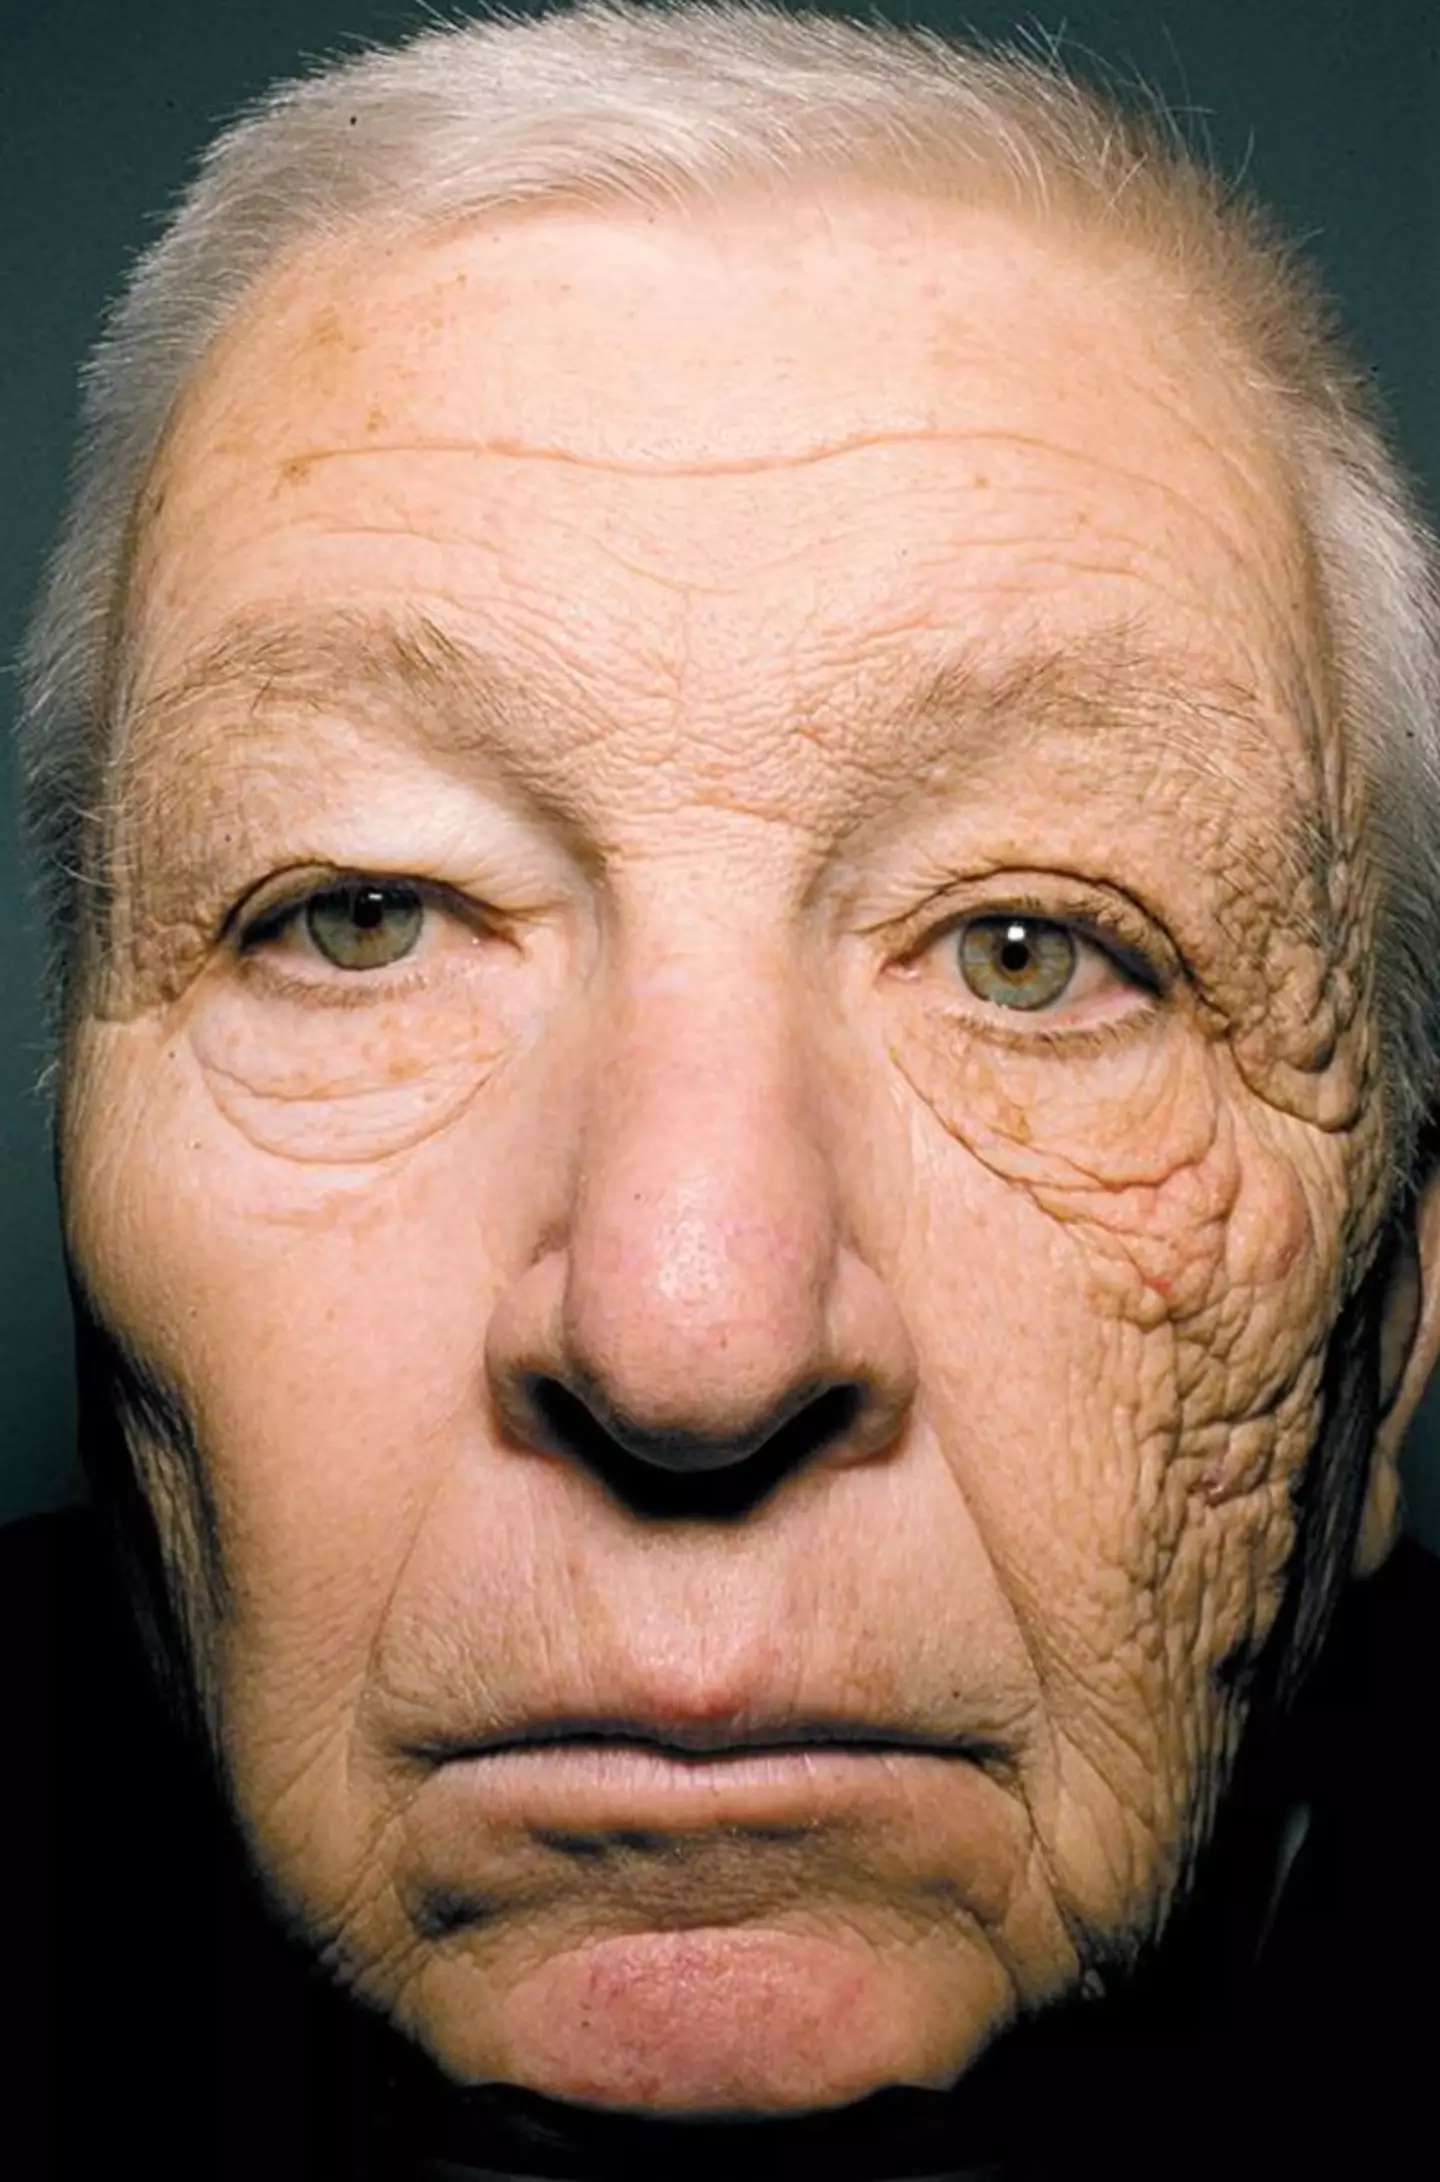 A portrait showing the extent of the sun damage caused to the man's face.